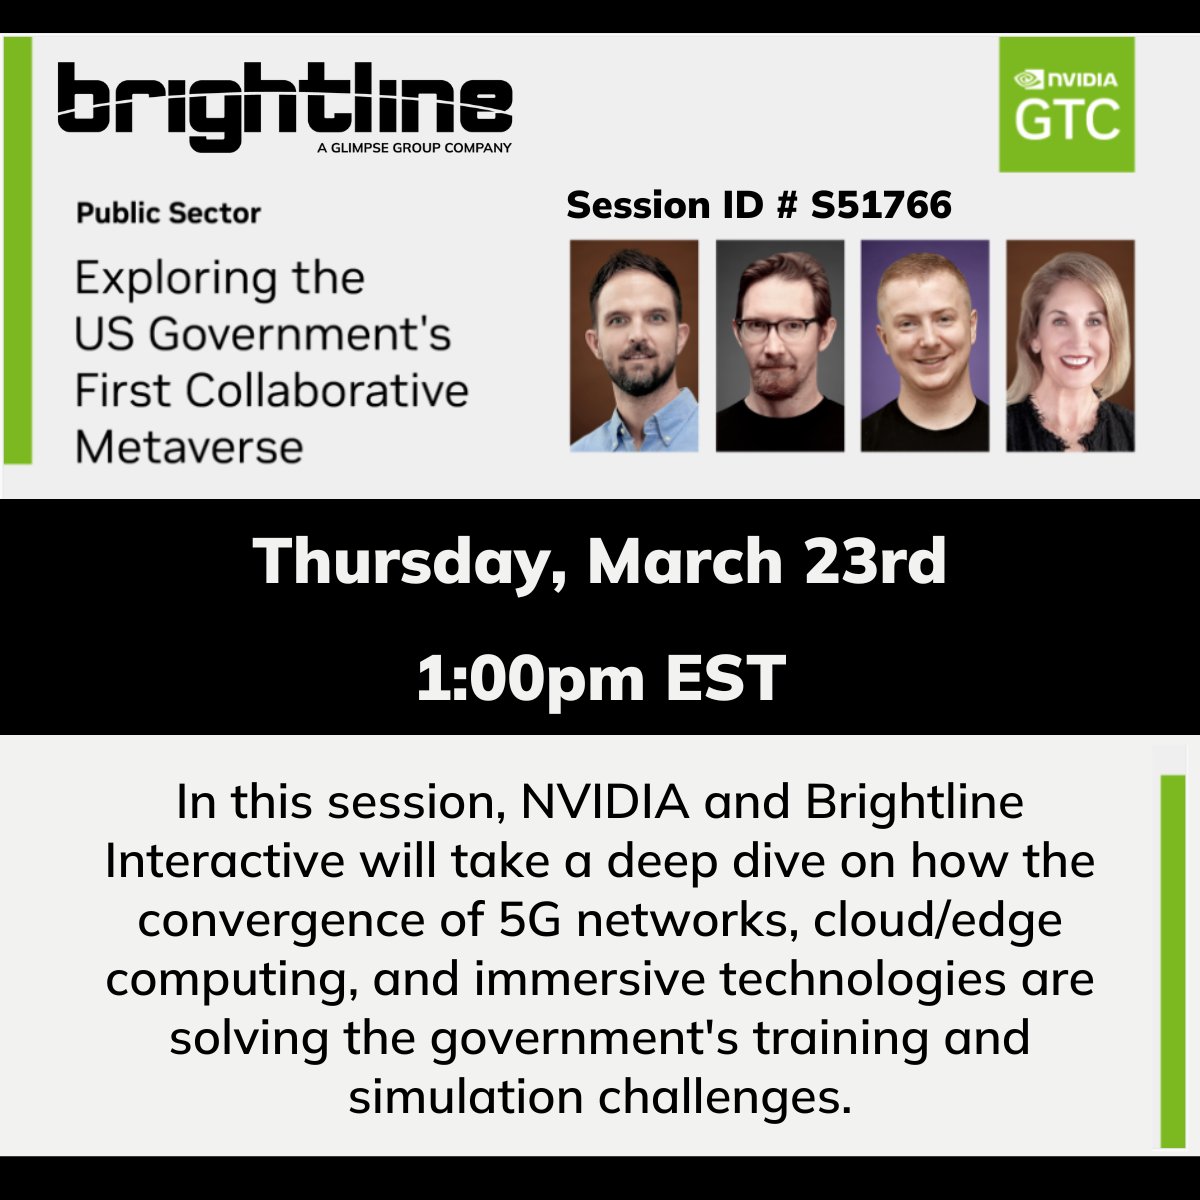 Join @brightline_int and @nvidia at 1pm EST this Thursday, March 23rd for a virtual session from @NVIDIAGTC. (1) Register for GTC: bit.ly/register_gtc23 and (2) Register for SessionS51766: bit.ly/session-s51766